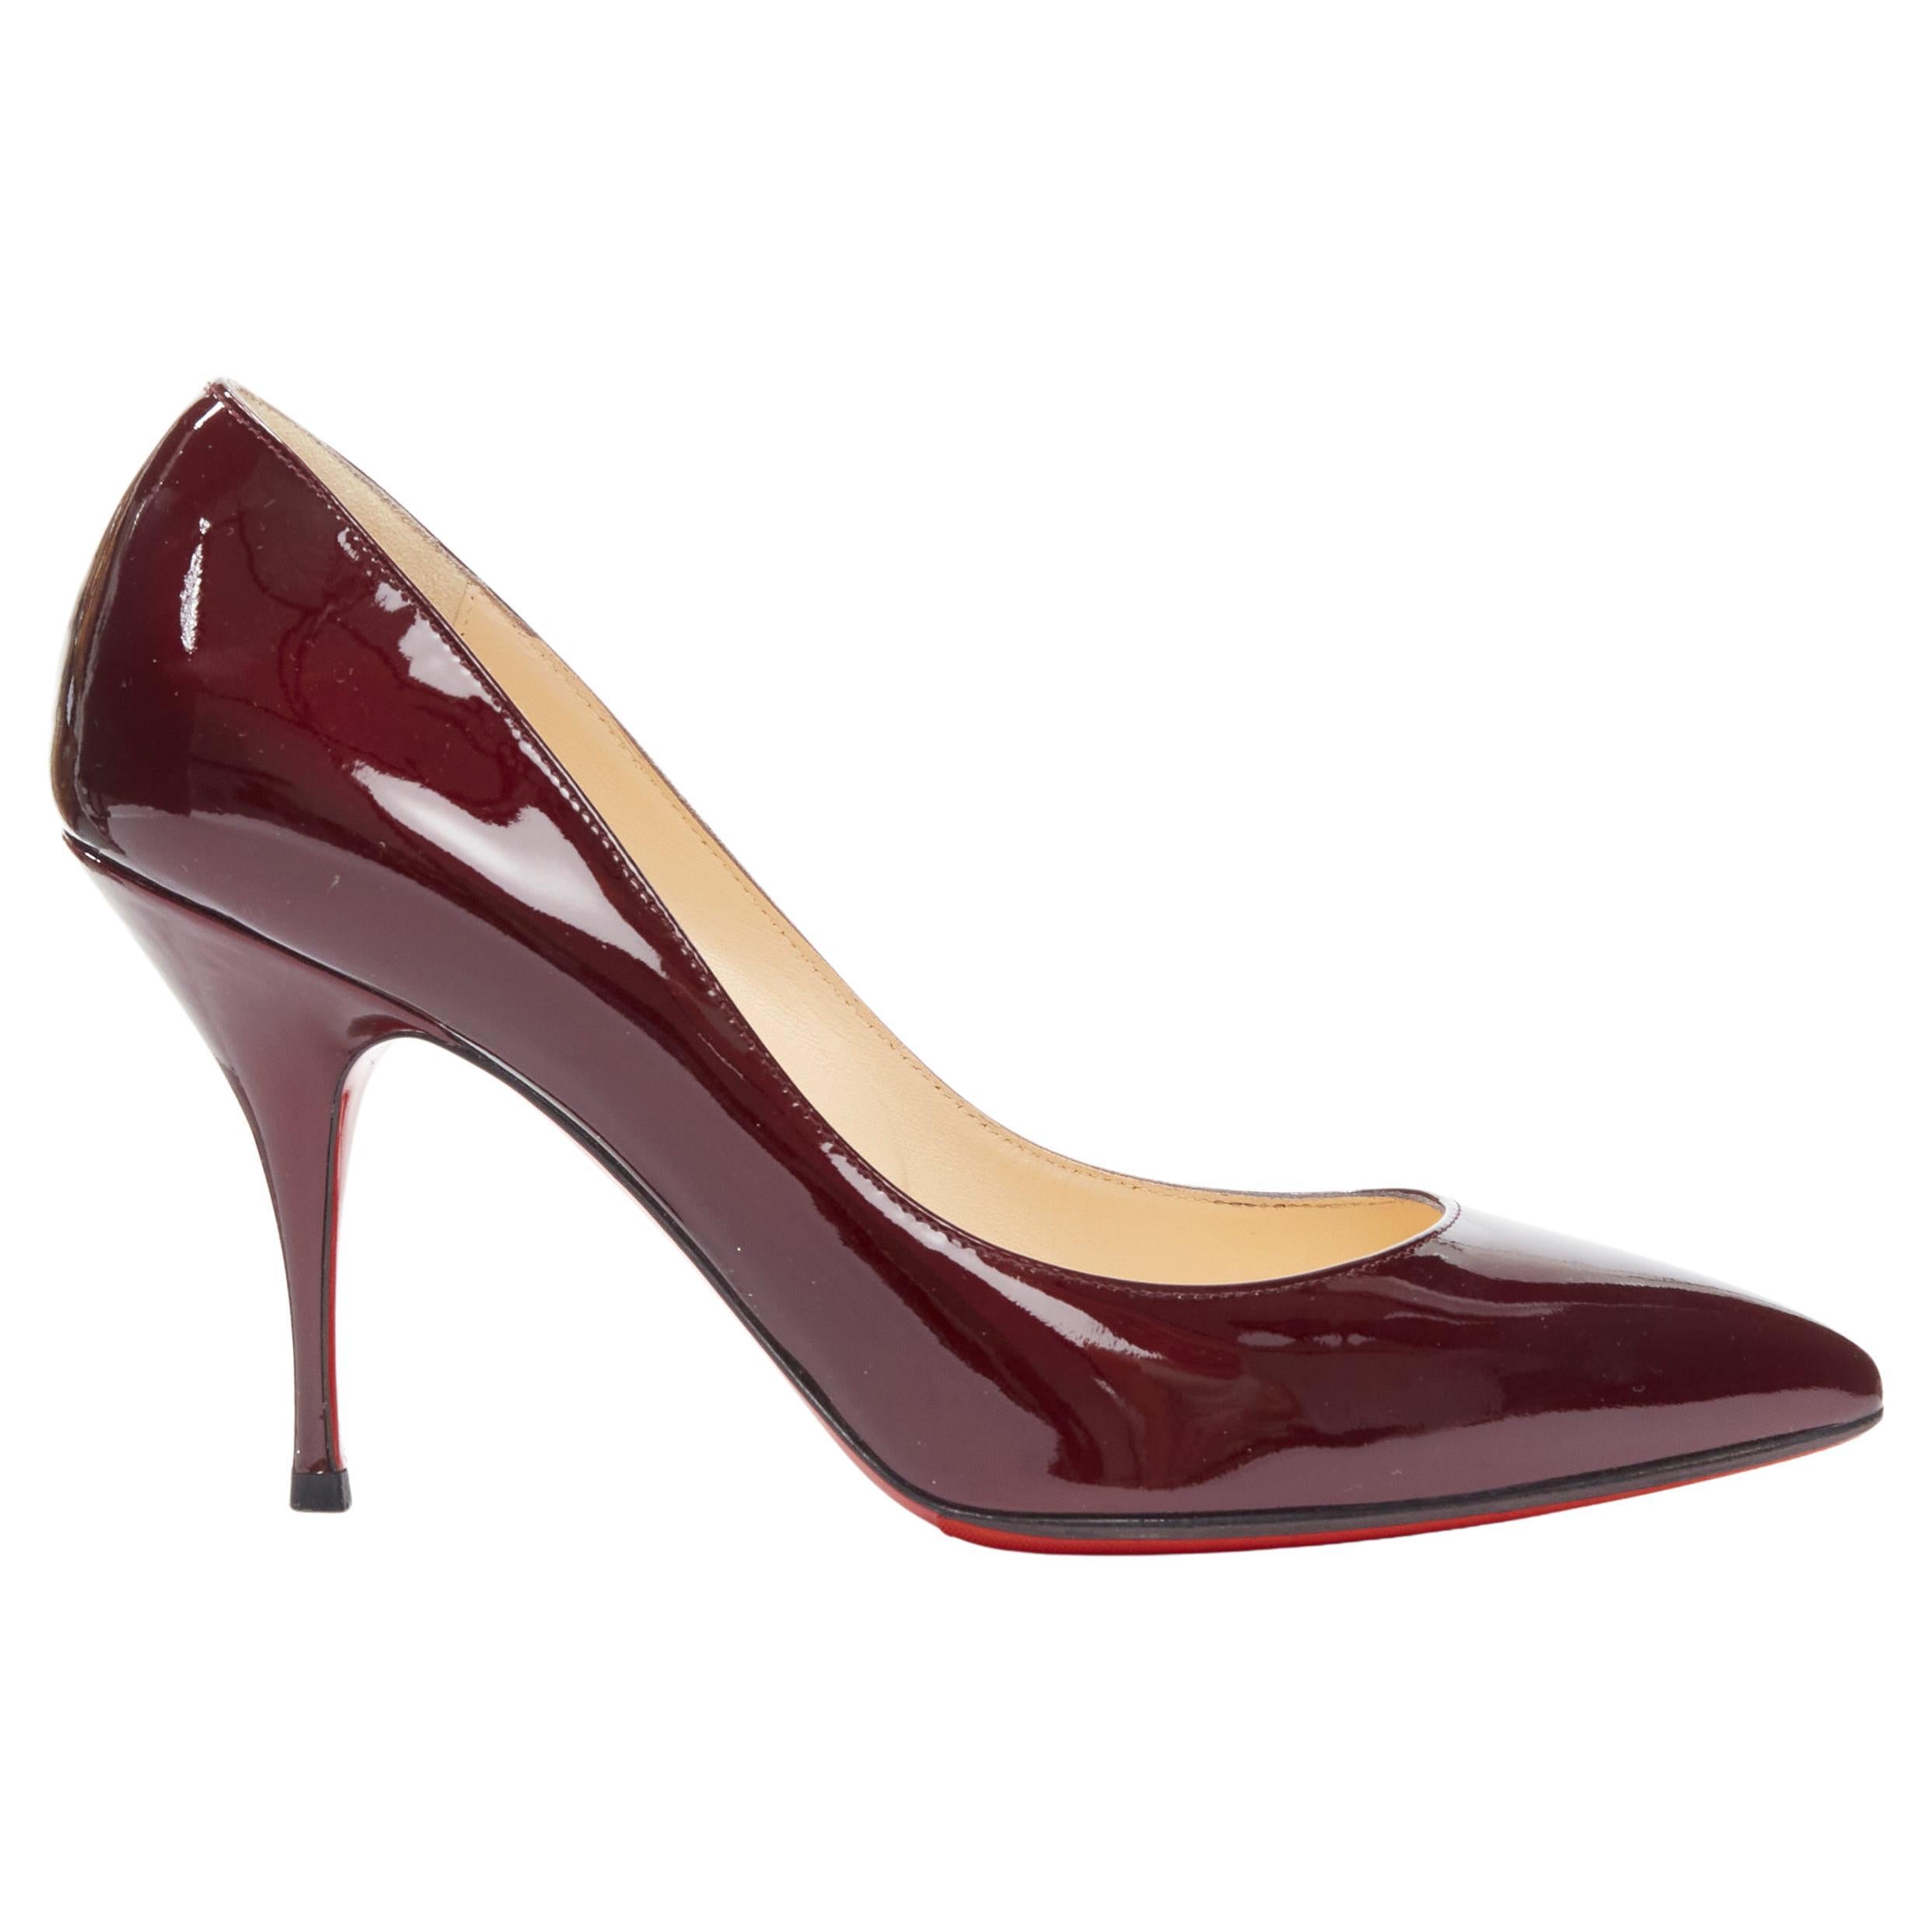 CHRISTIAN LOUBOUTIN burgundy red patent leather 85mm pigalle pumps EU37